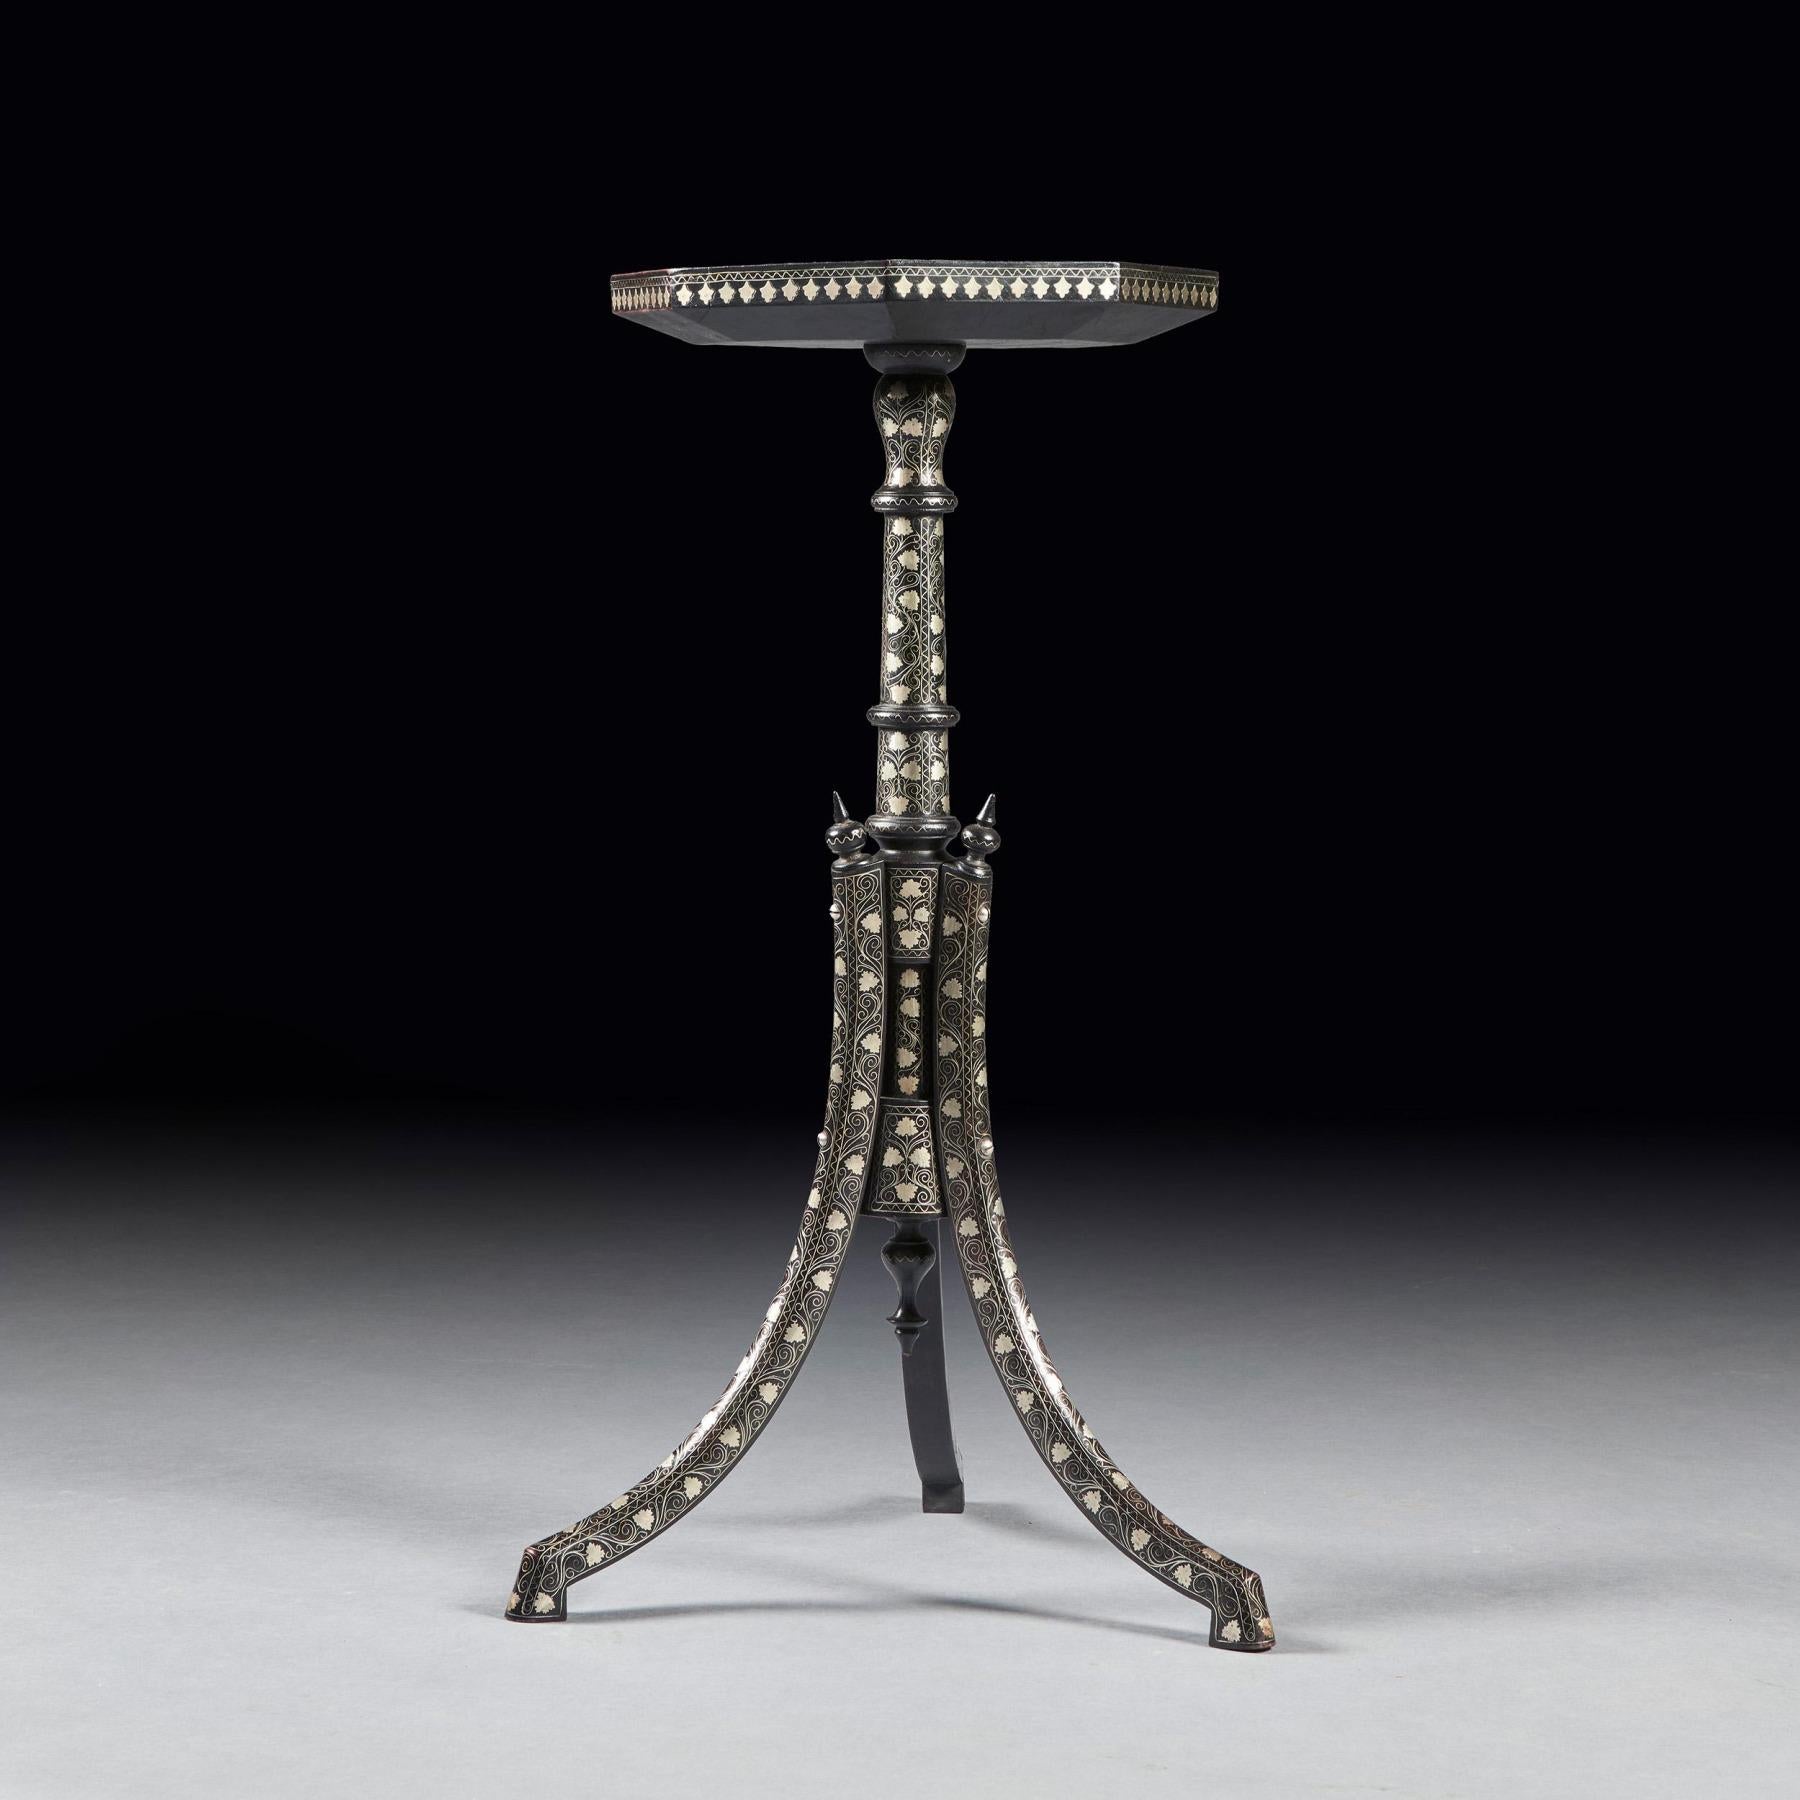 An extremely fine silver inlaid coffee table / tripod table attributed to the Armenian maker, Vortik Potikian Afyonkarahisar.

Turkey Cira 1900.

The silver inlaid octagonal top with central radiating ‘rosace’ framed by four borders of scrolling